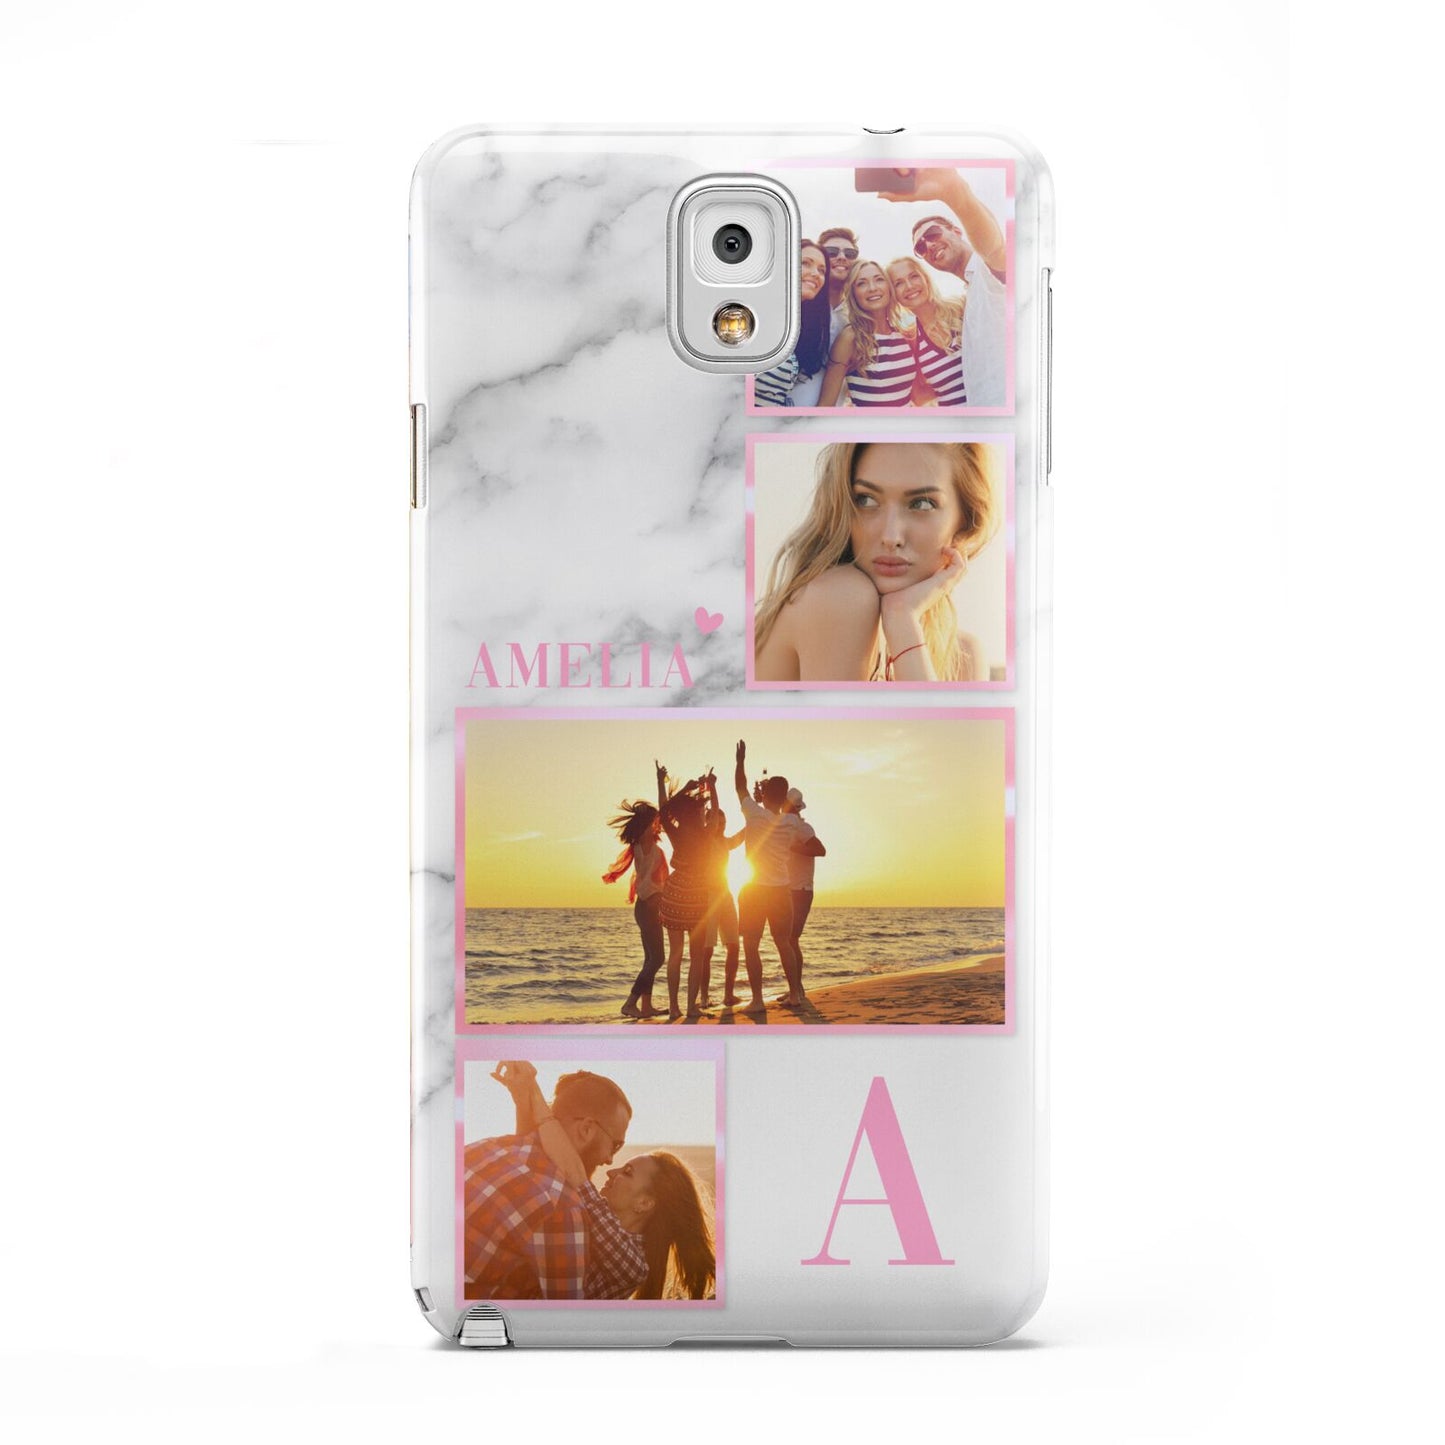 Personalised Marble Photo Collage Samsung Galaxy Note 3 Case